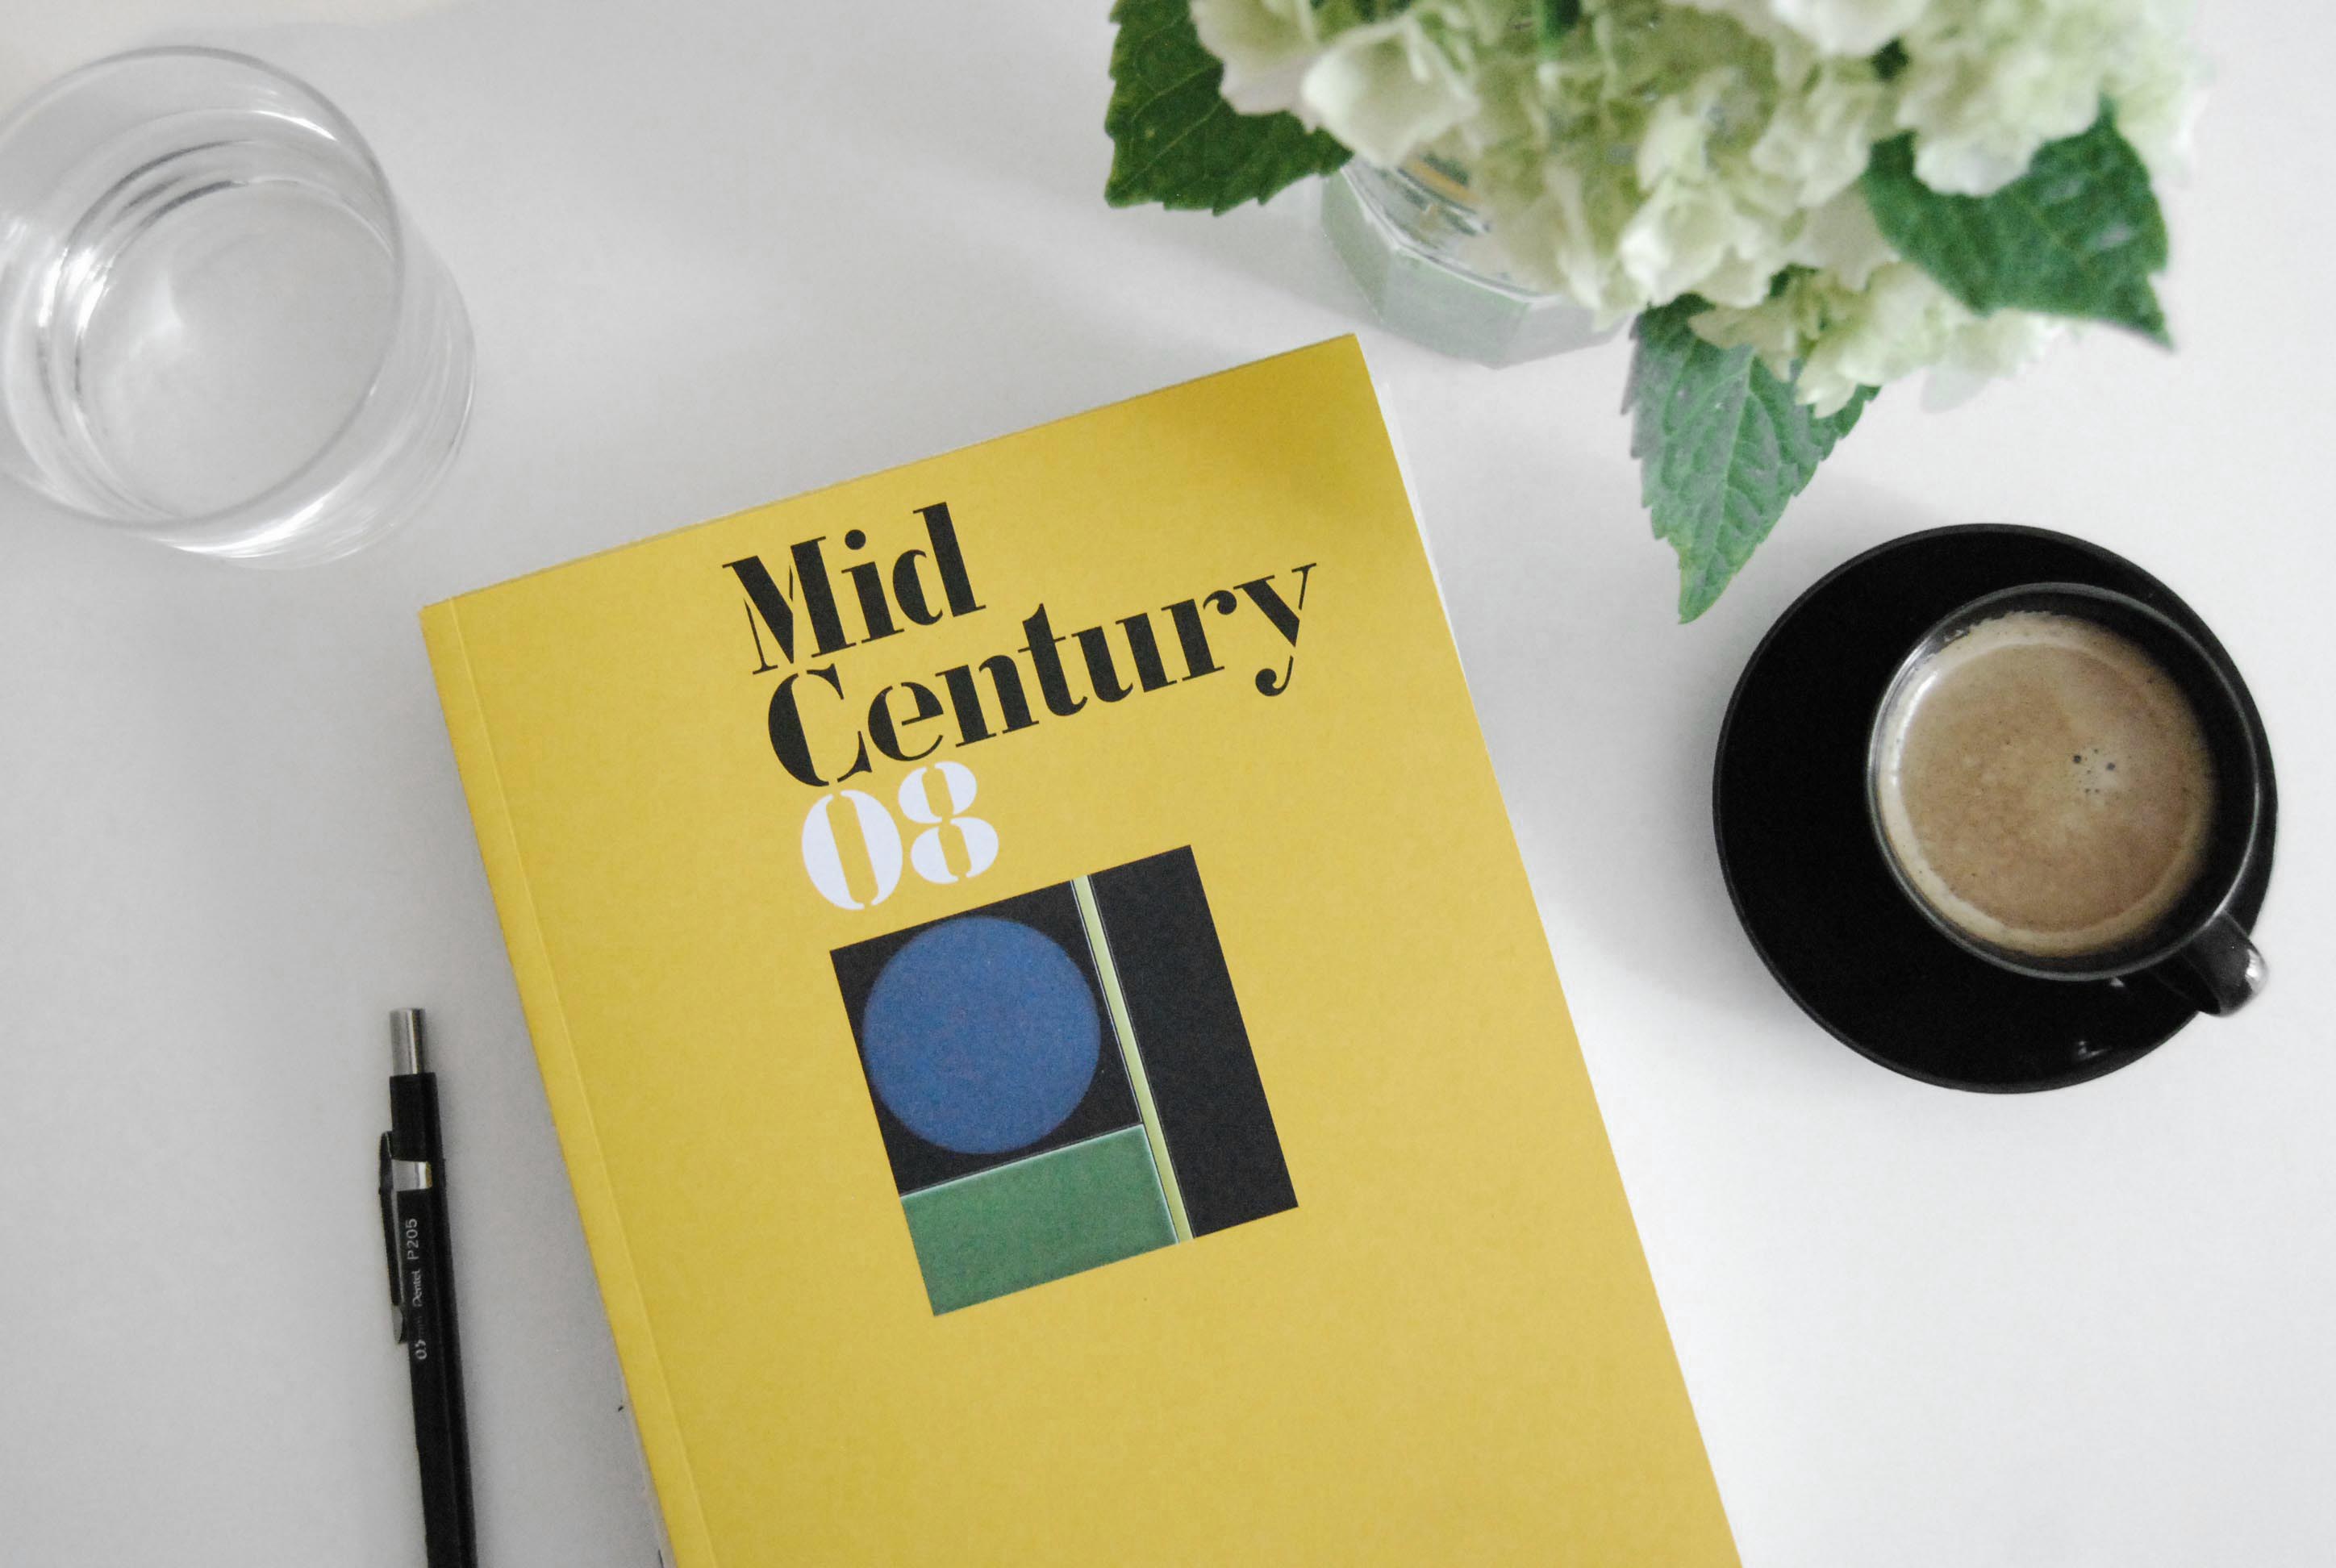 Mid-Century Magazine: the best of 20th Century interiors, furniture and architecture | You can visit us at our website, www.essentialhome.eu and check our Pinterest @midcenturyblog to get more #MidCenturyModern inspiration.